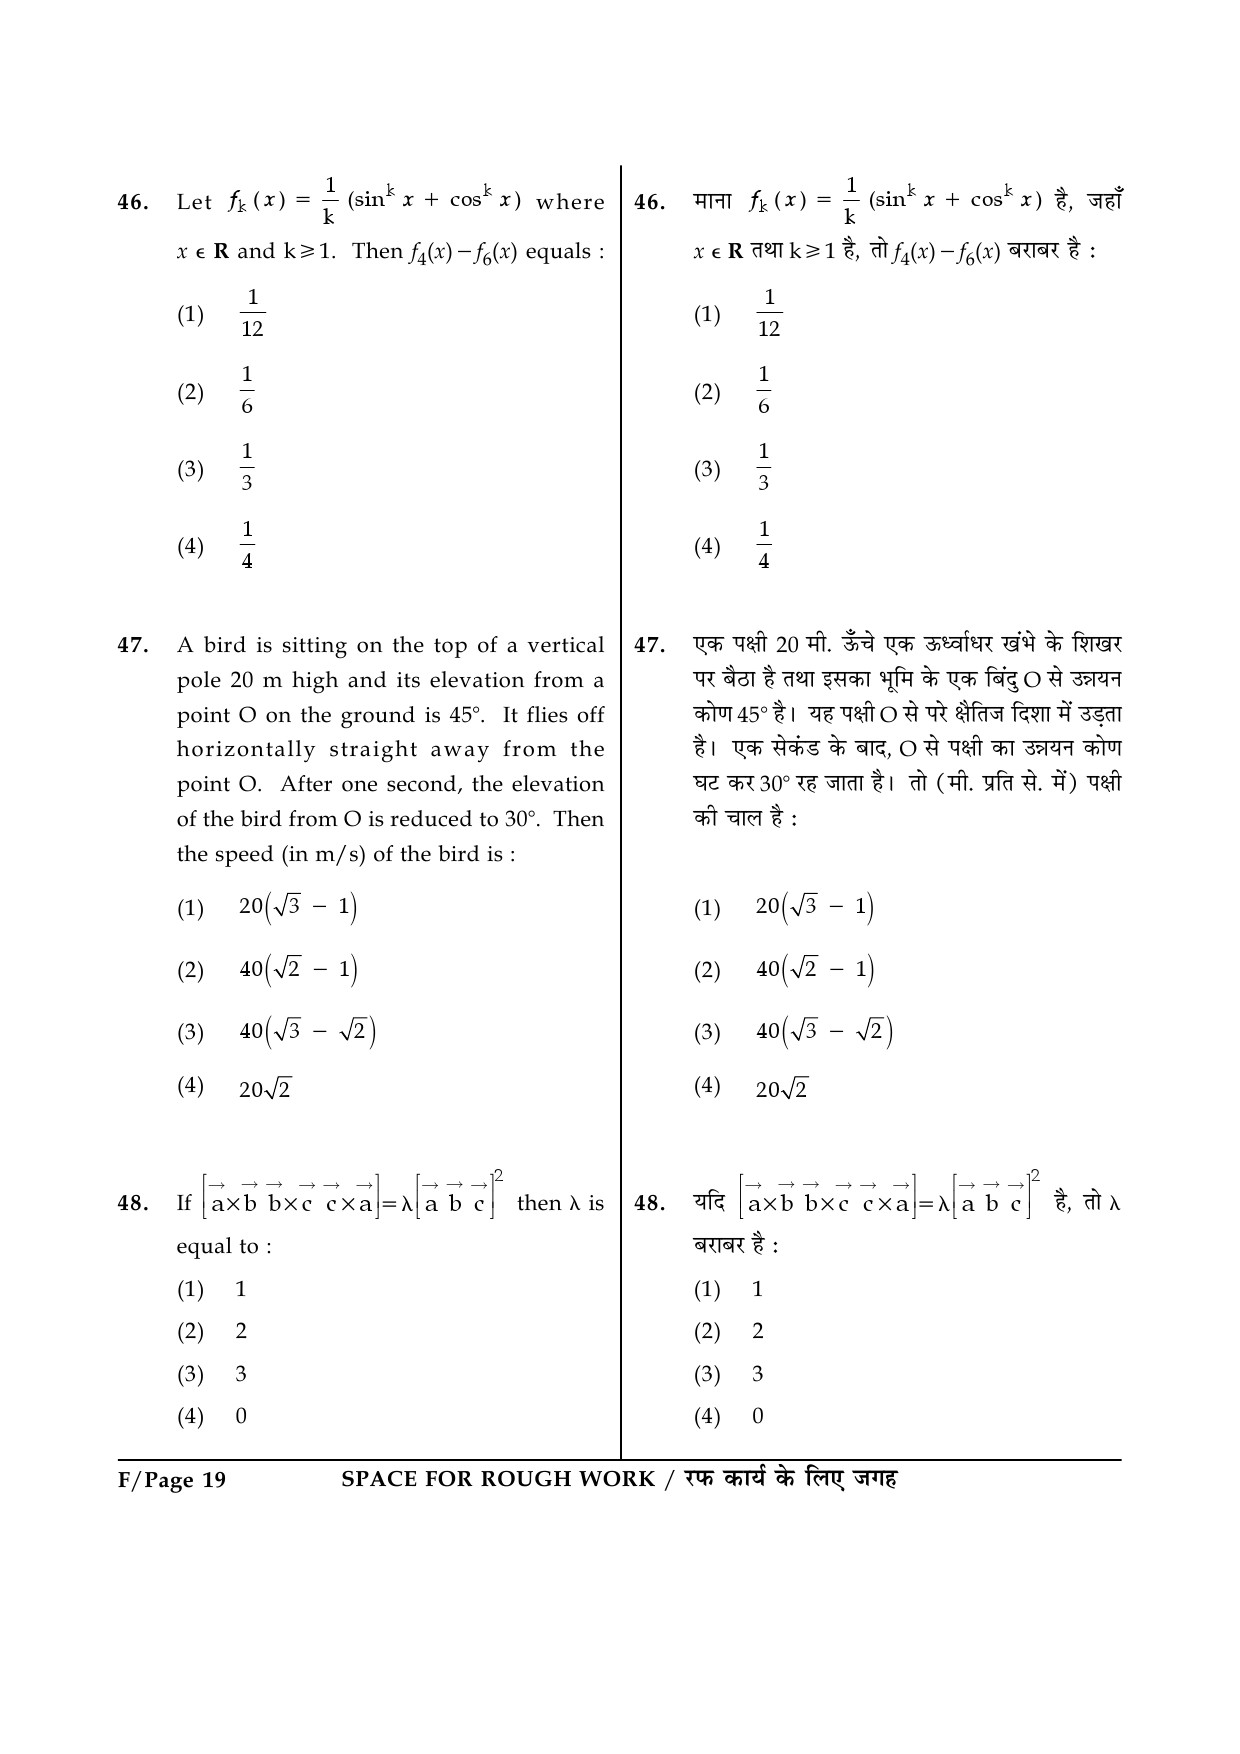 JEE Main Exam Question Paper 2014 Booklet F 19